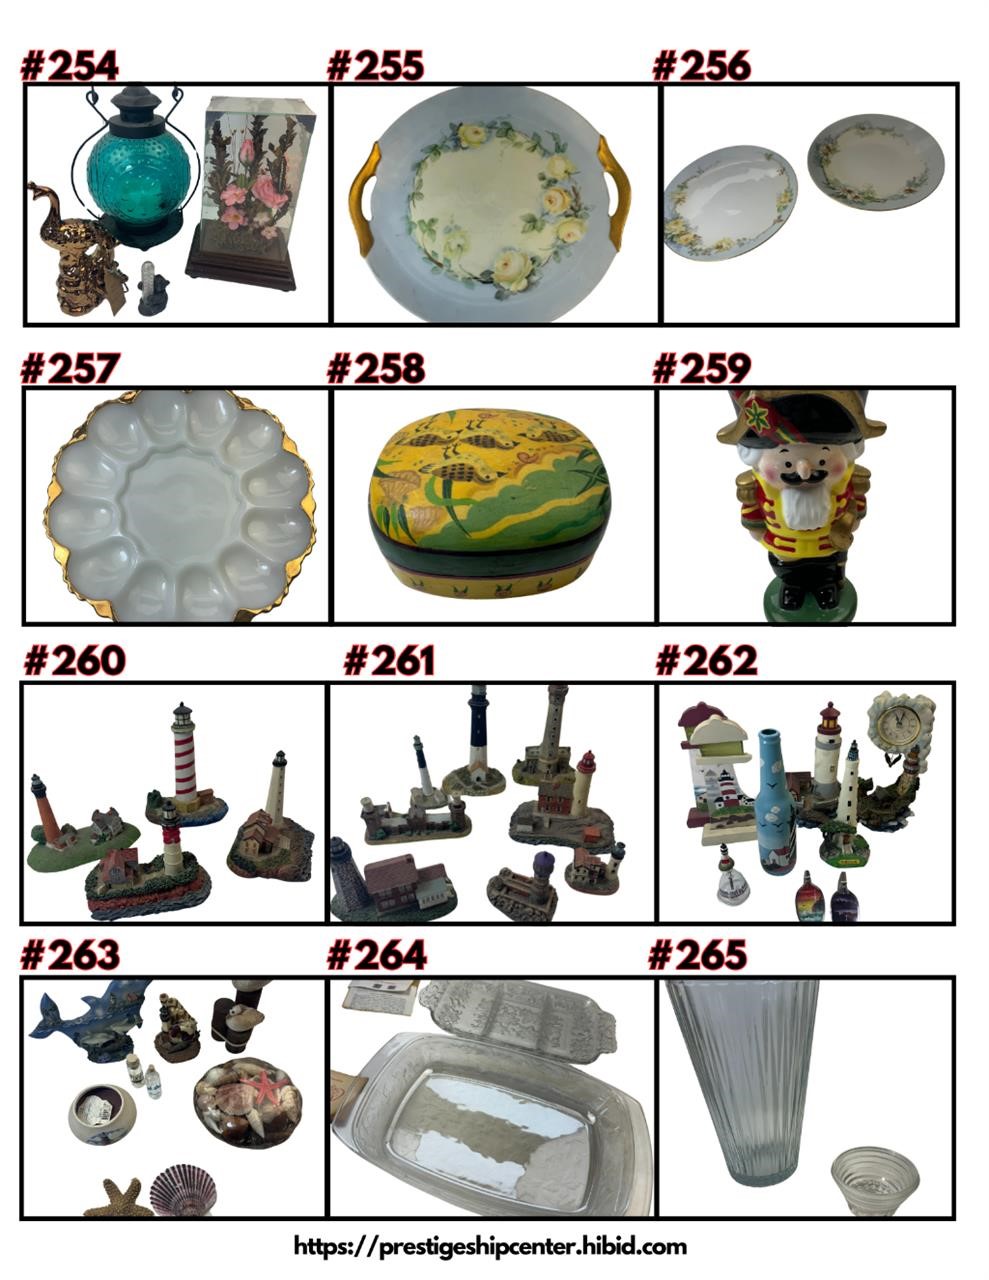 Absolute Estate Auction, Preserved Treasures of a Mother!